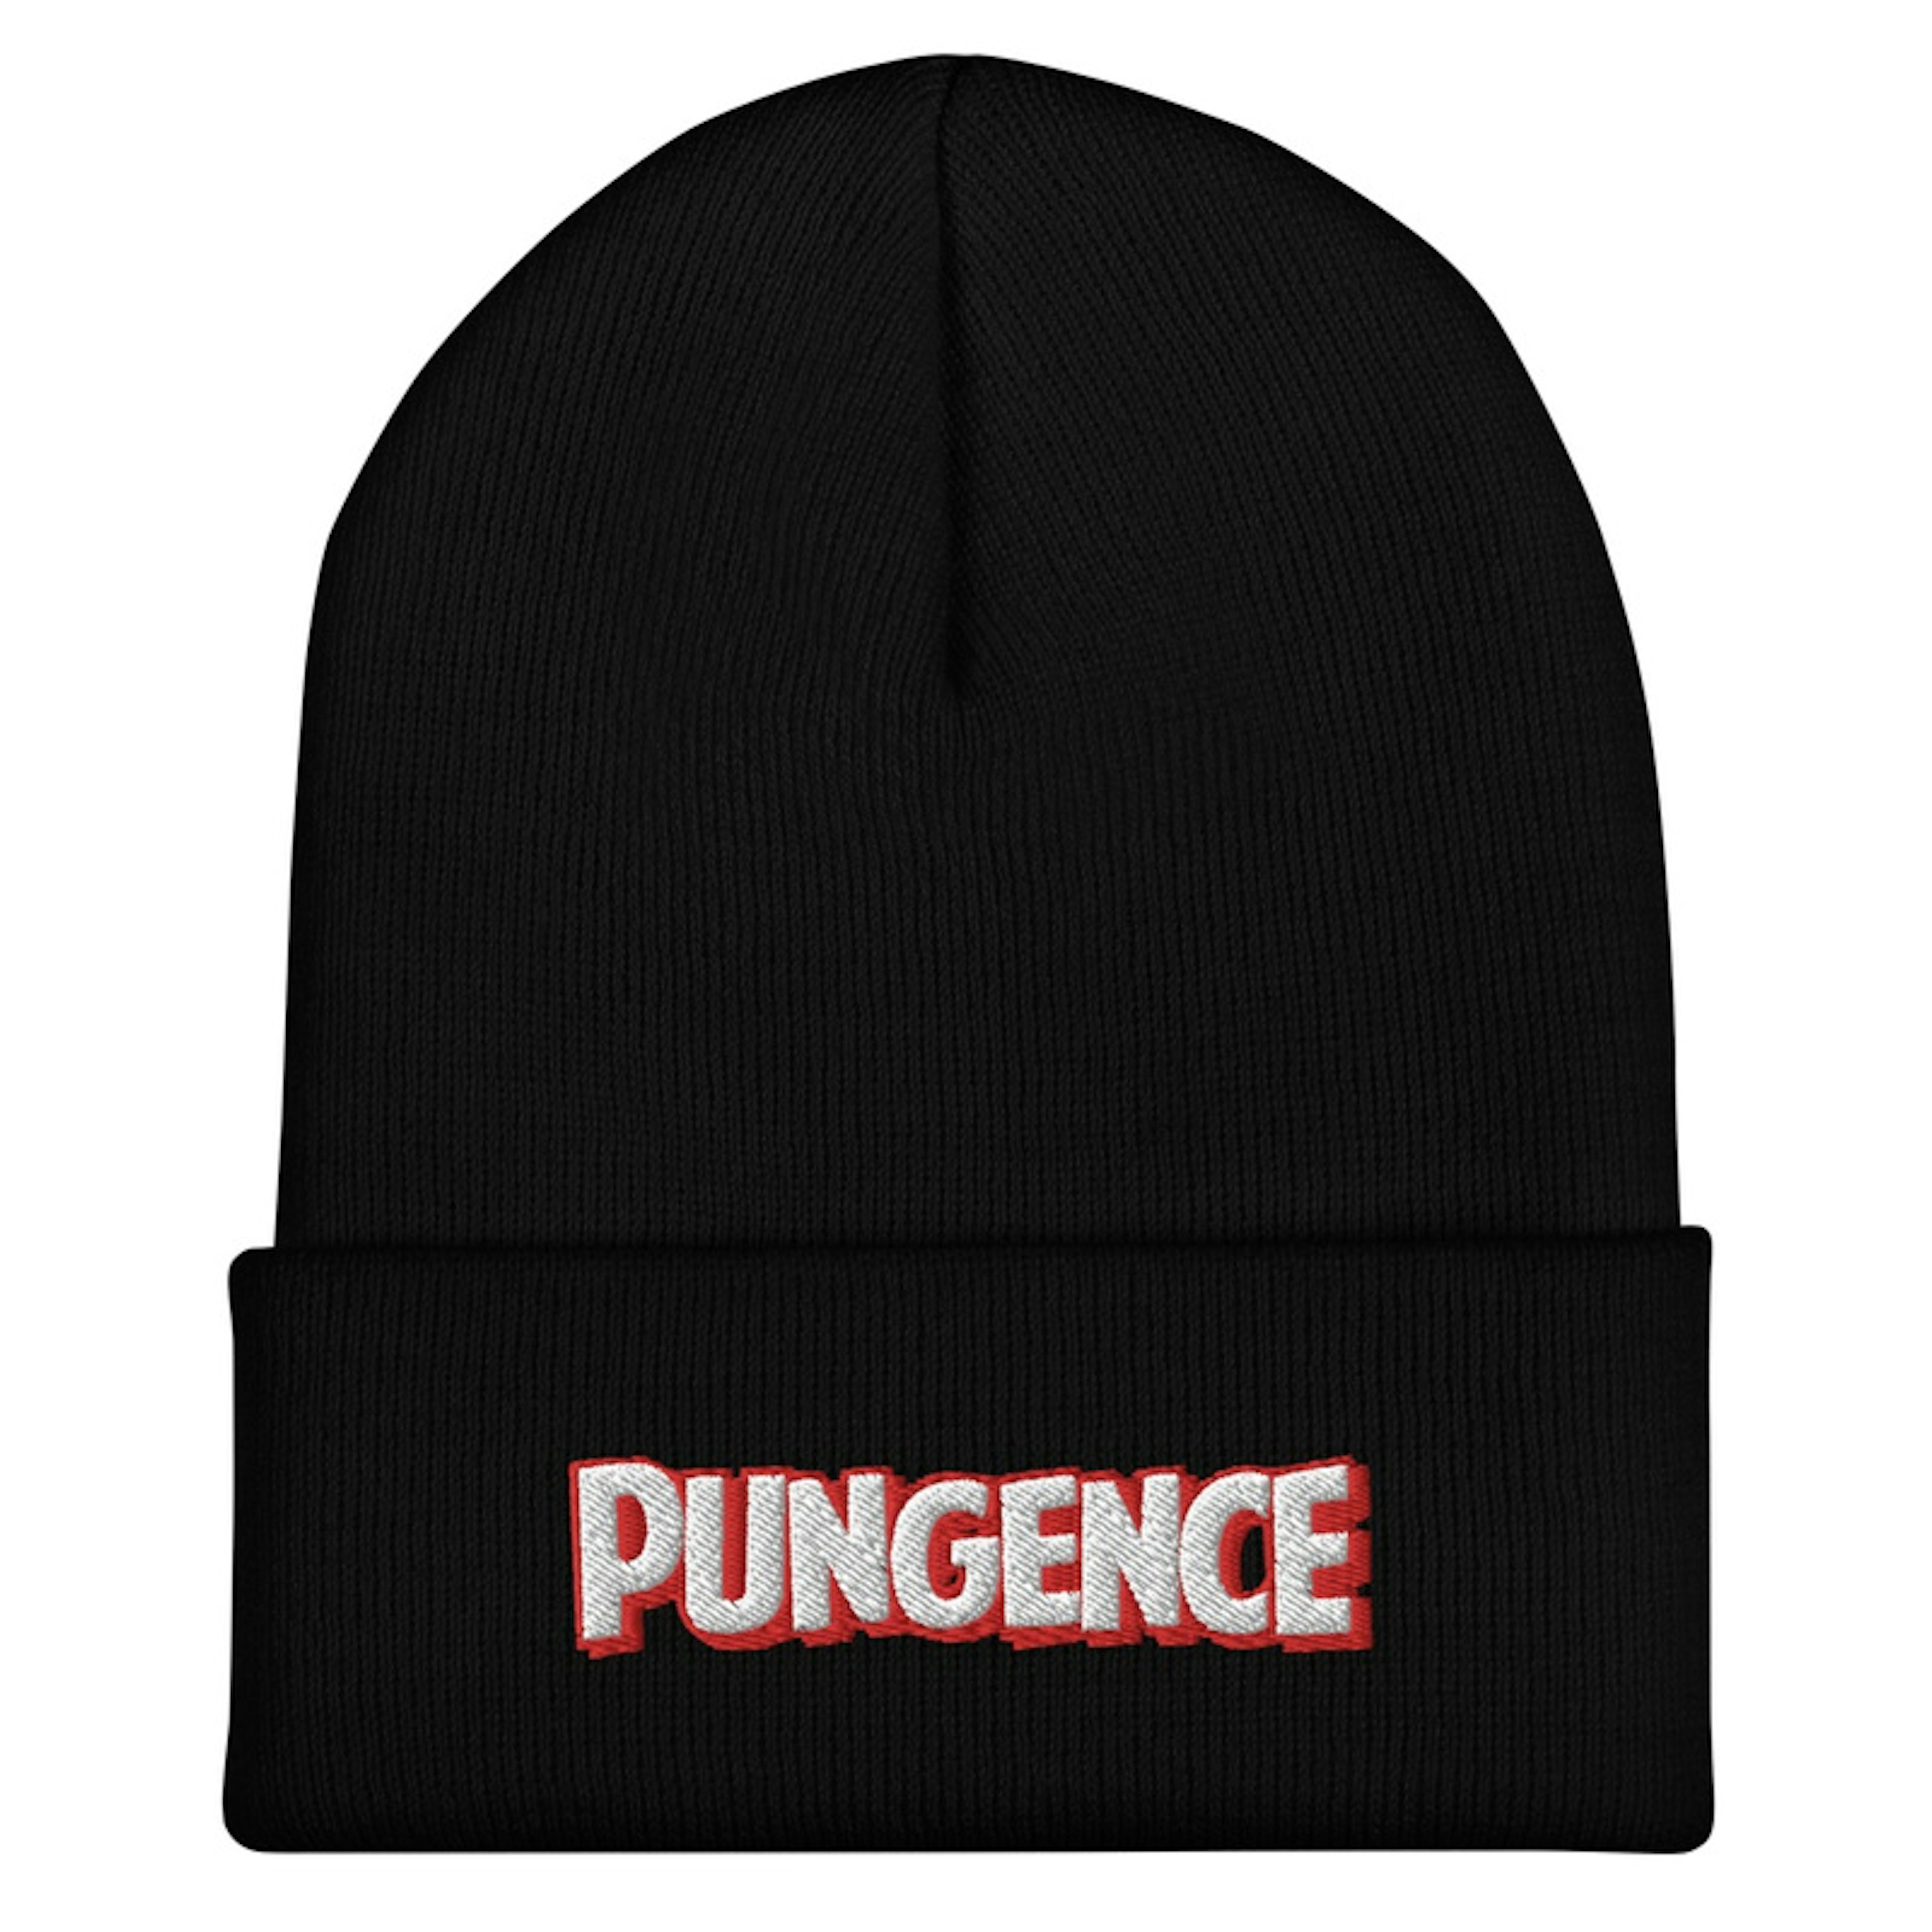 Pungence Embroidered Beanie!